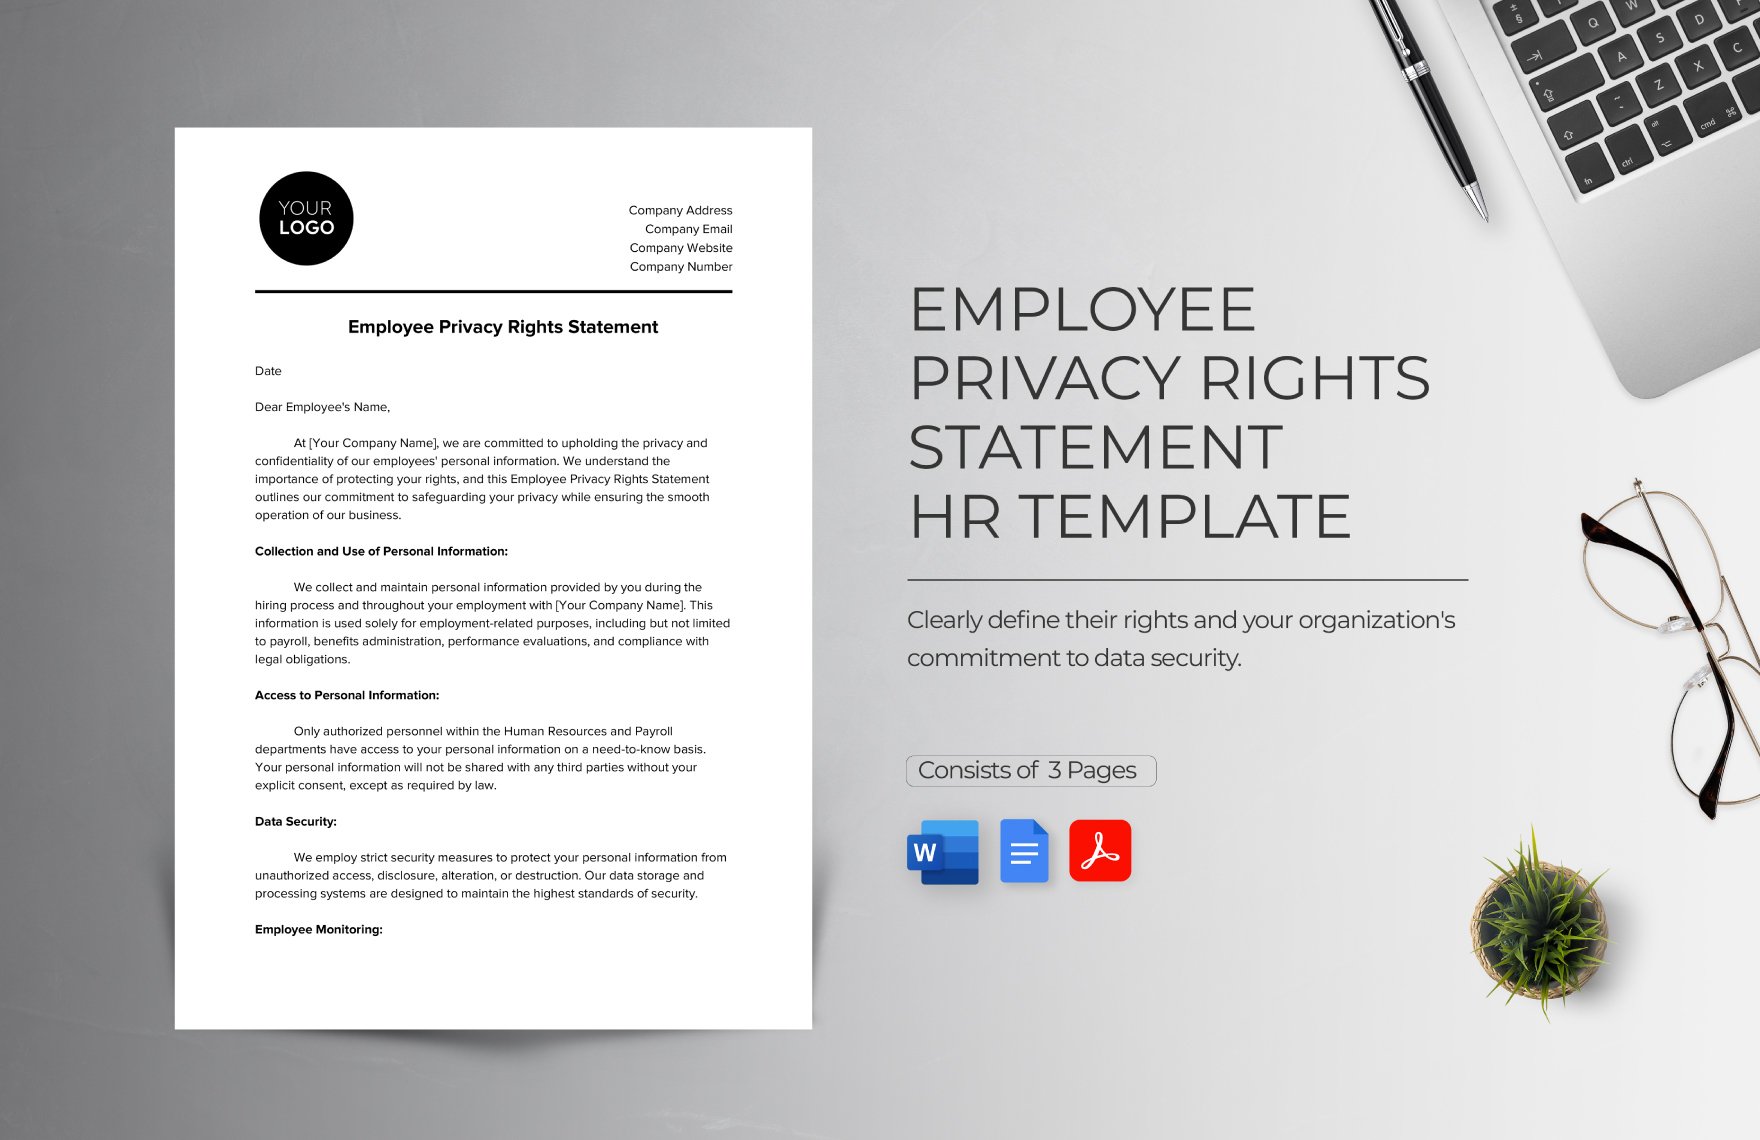 Employee Privacy Rights Statement HR Template in Word, Google Docs, PDF